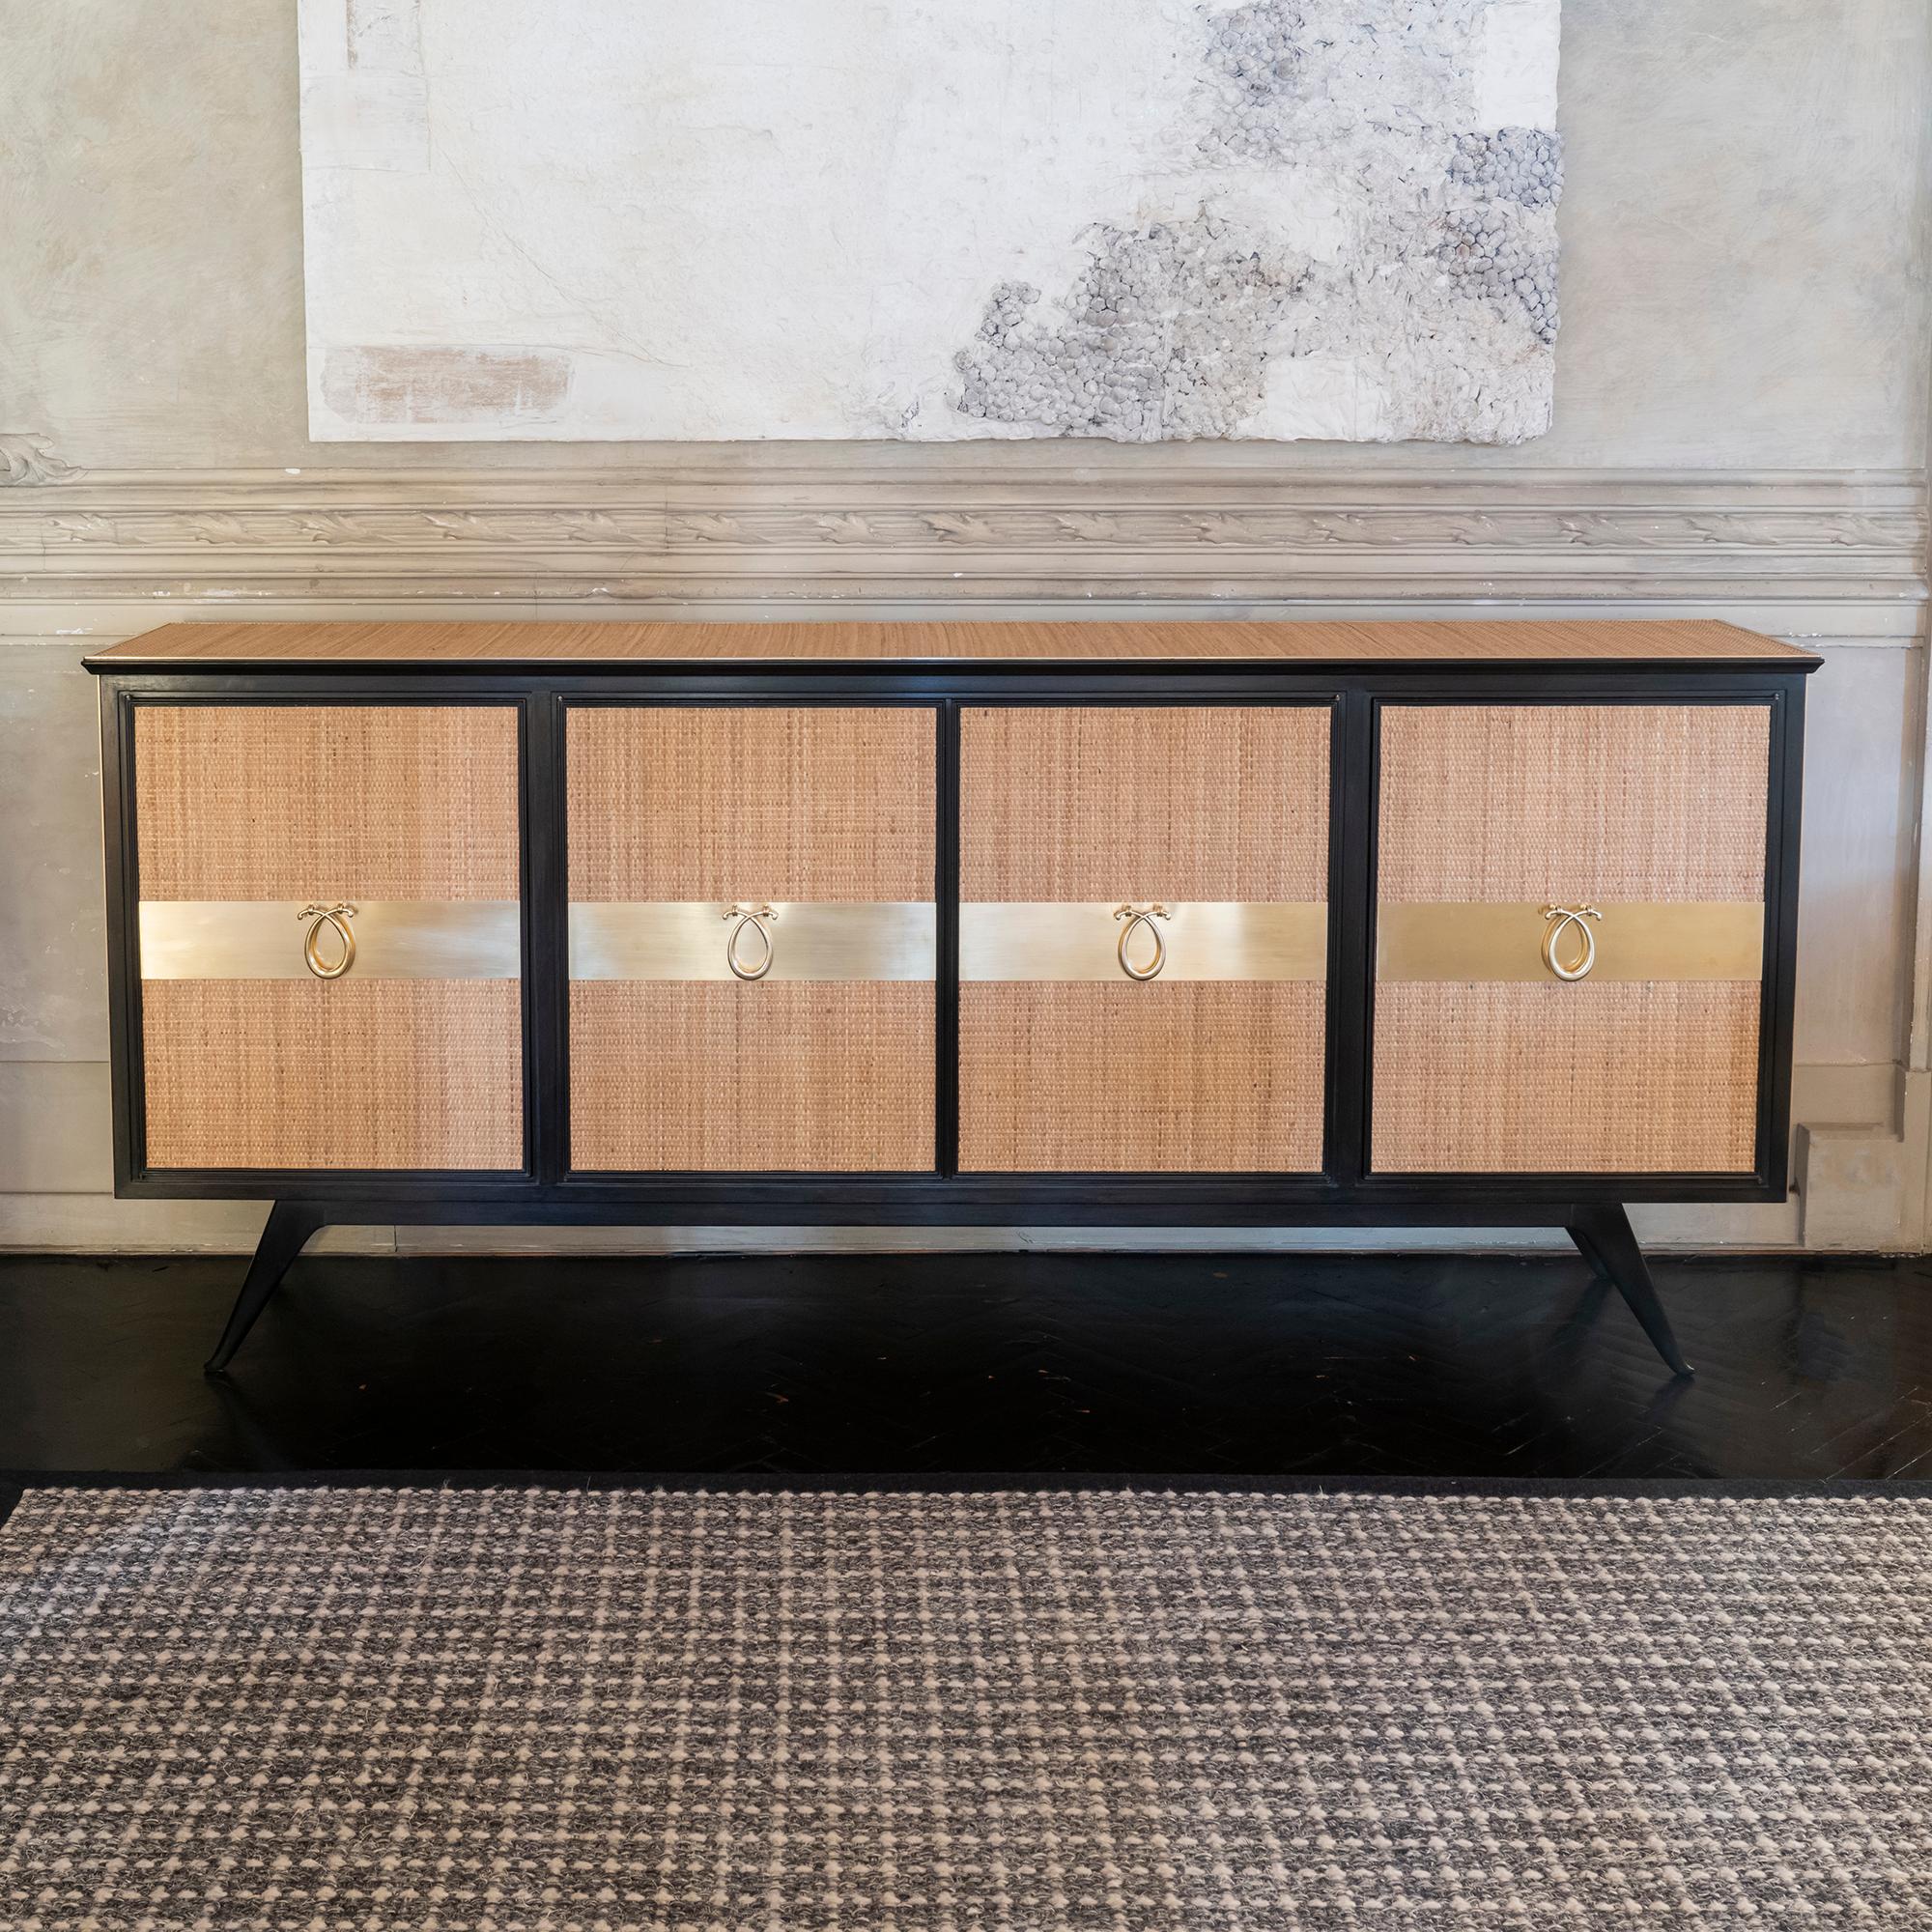 Sideboard in ebonized wood covered in rattan with original brass details and handles, interior in cherry wood, side sections with fixed shelves and a drawer, center section is a dry bar with a waves brass decor, 
perfect condition and vintage